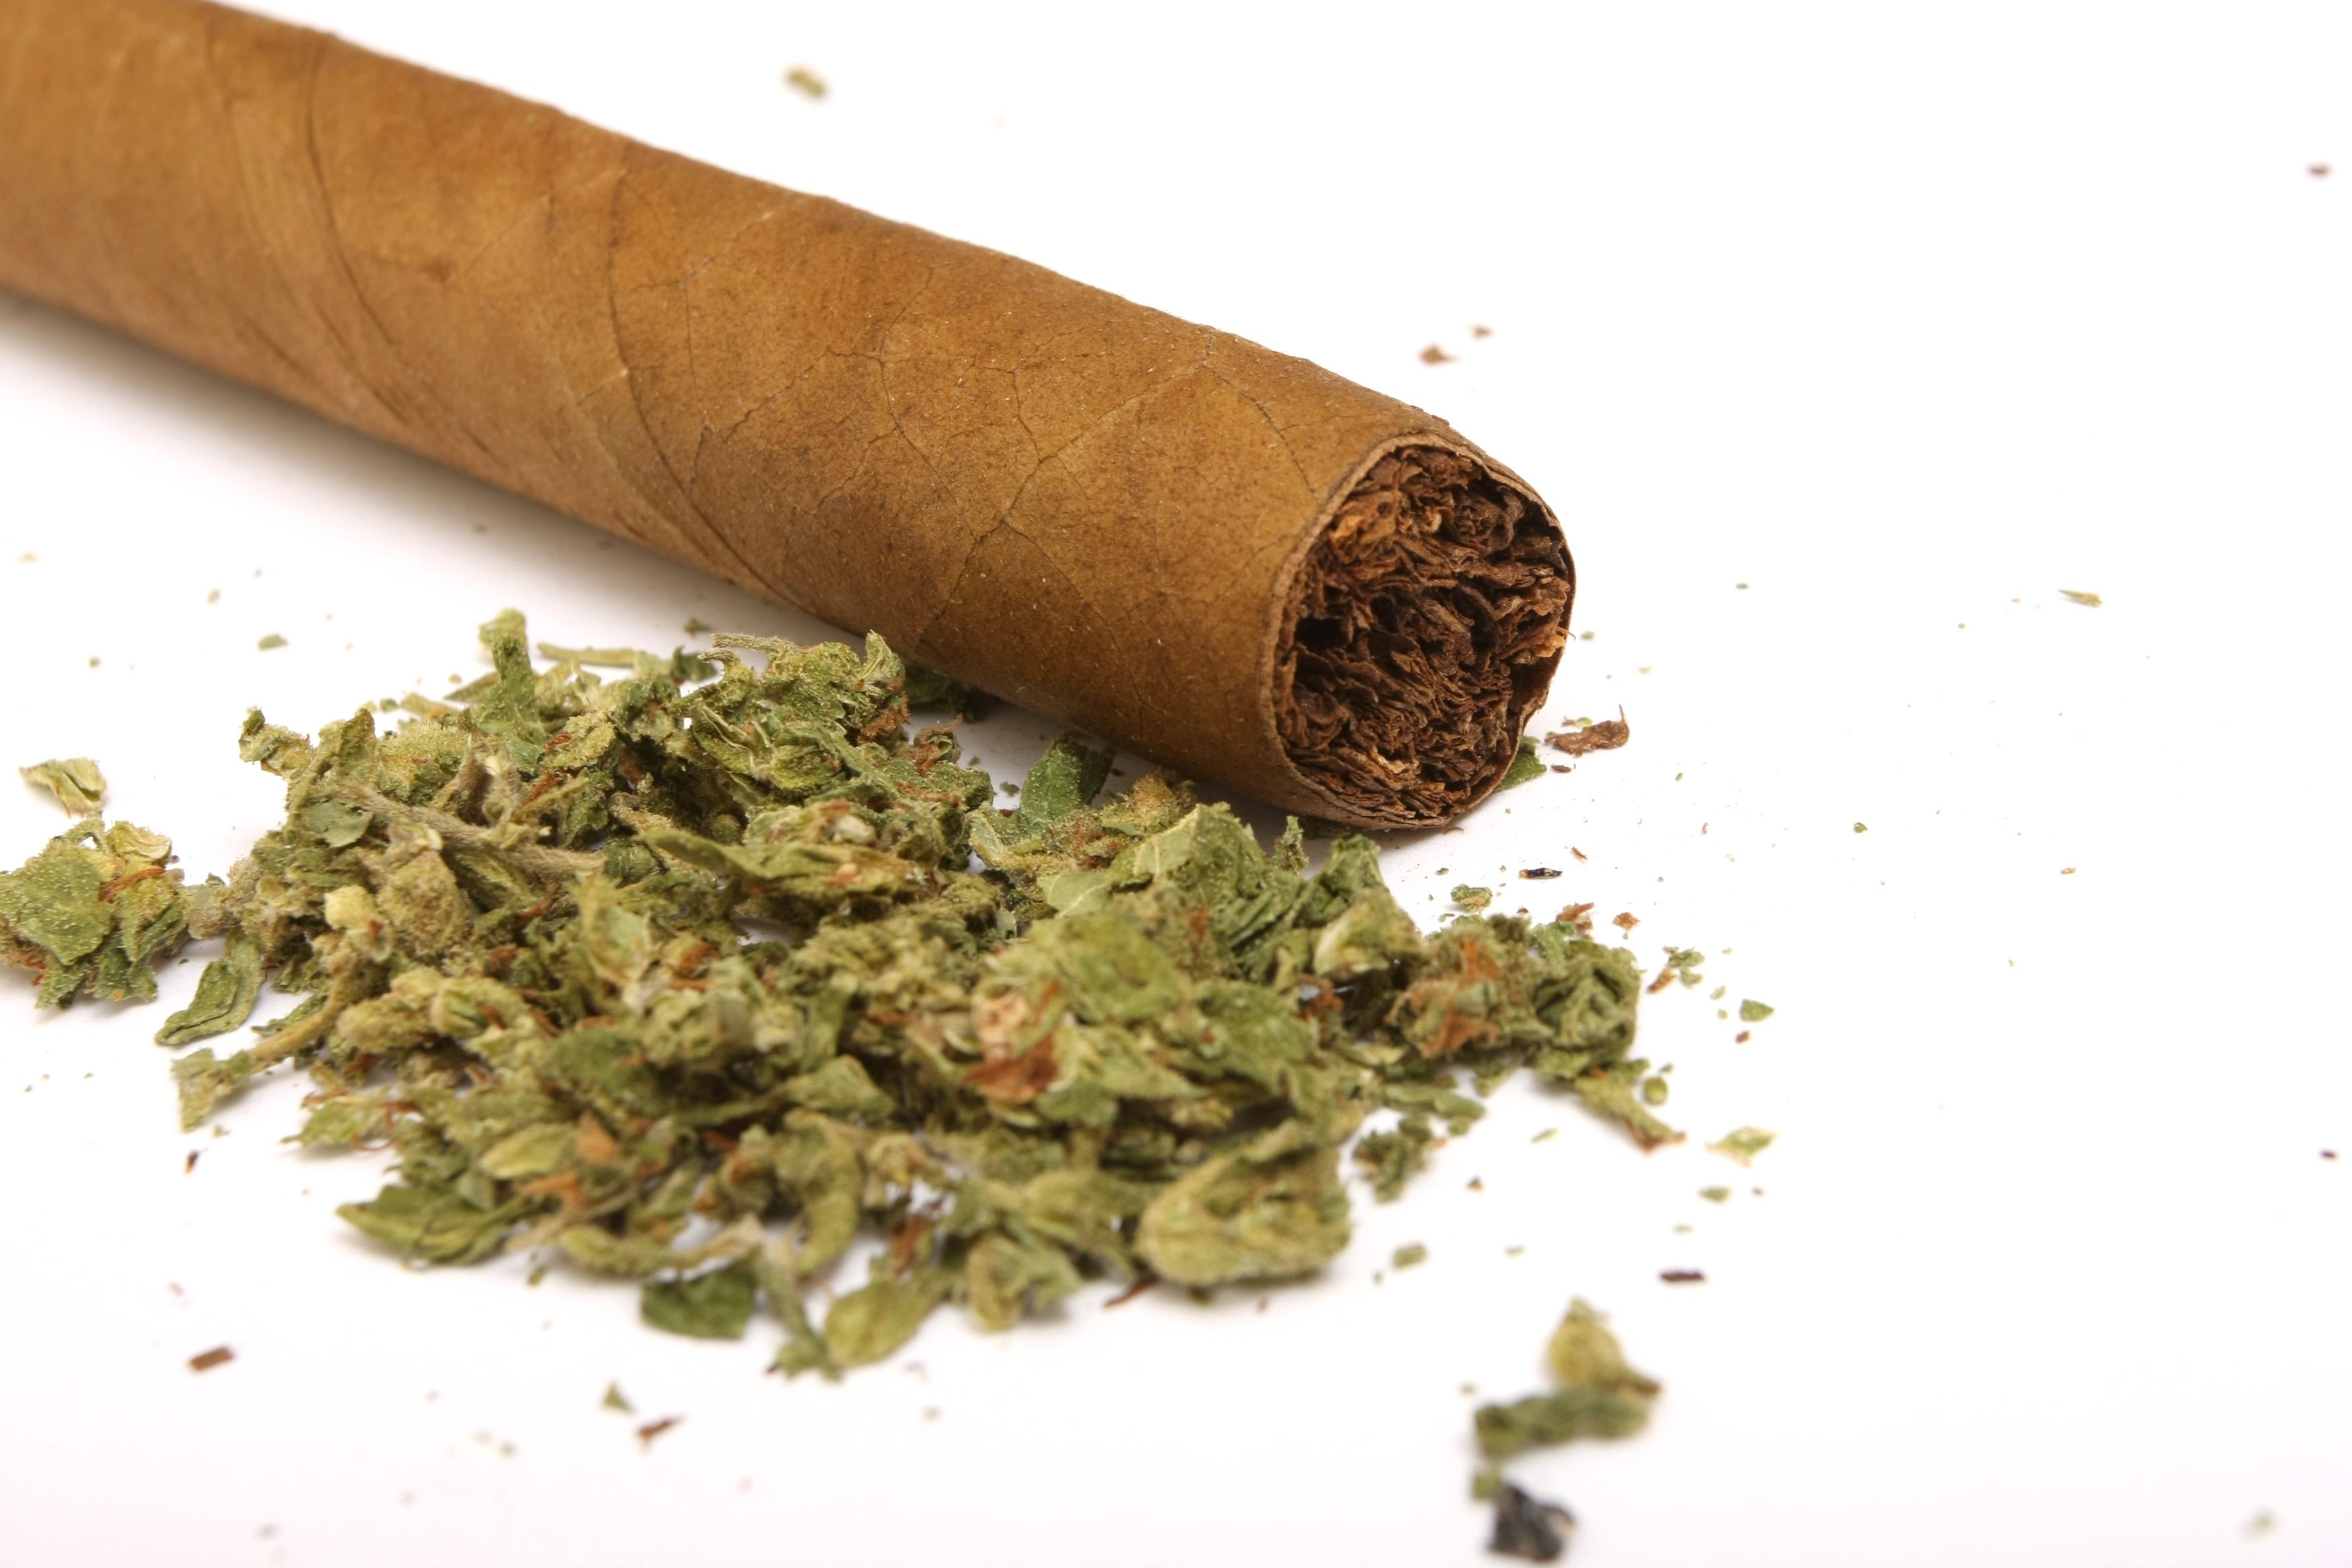 A brown cannabis blunt with the end cut sits behind a pile of loose flower.